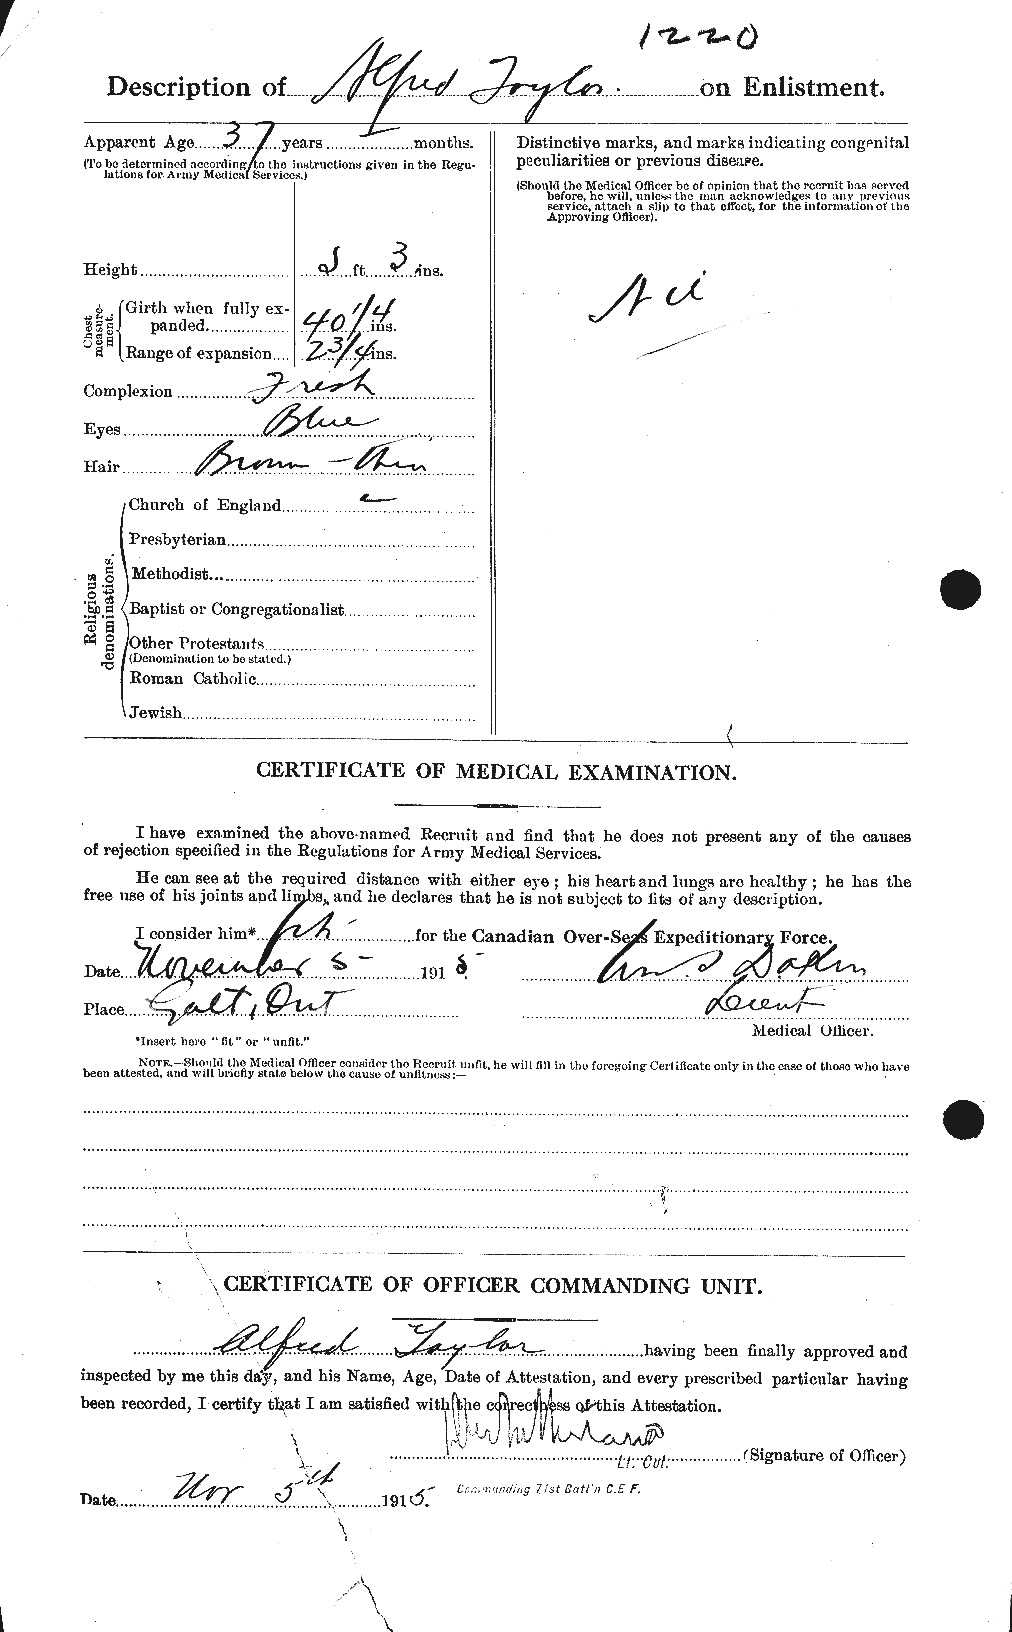 Personnel Records of the First World War - CEF 626171b